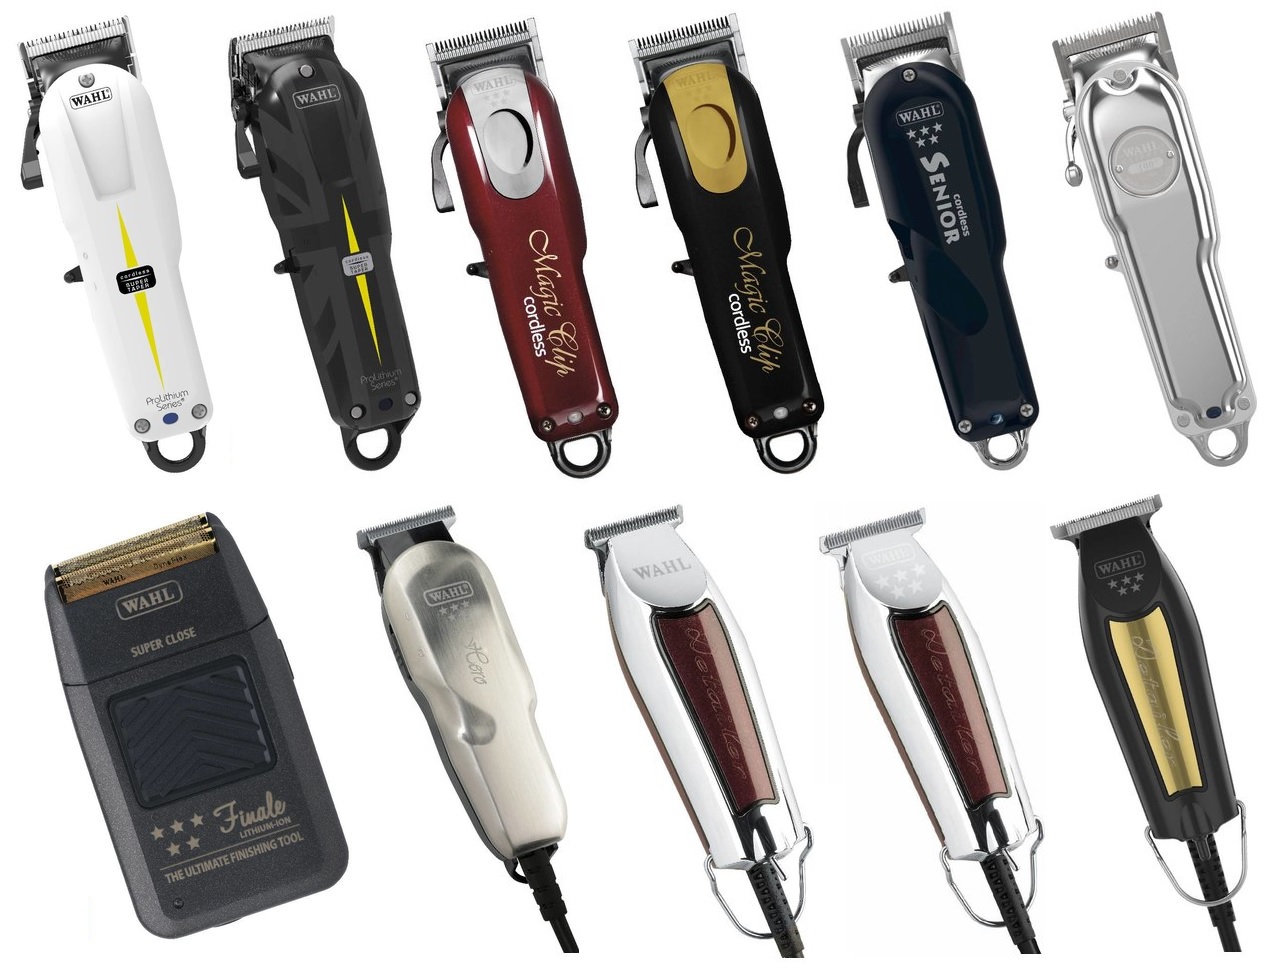 wahl clipper trimmer